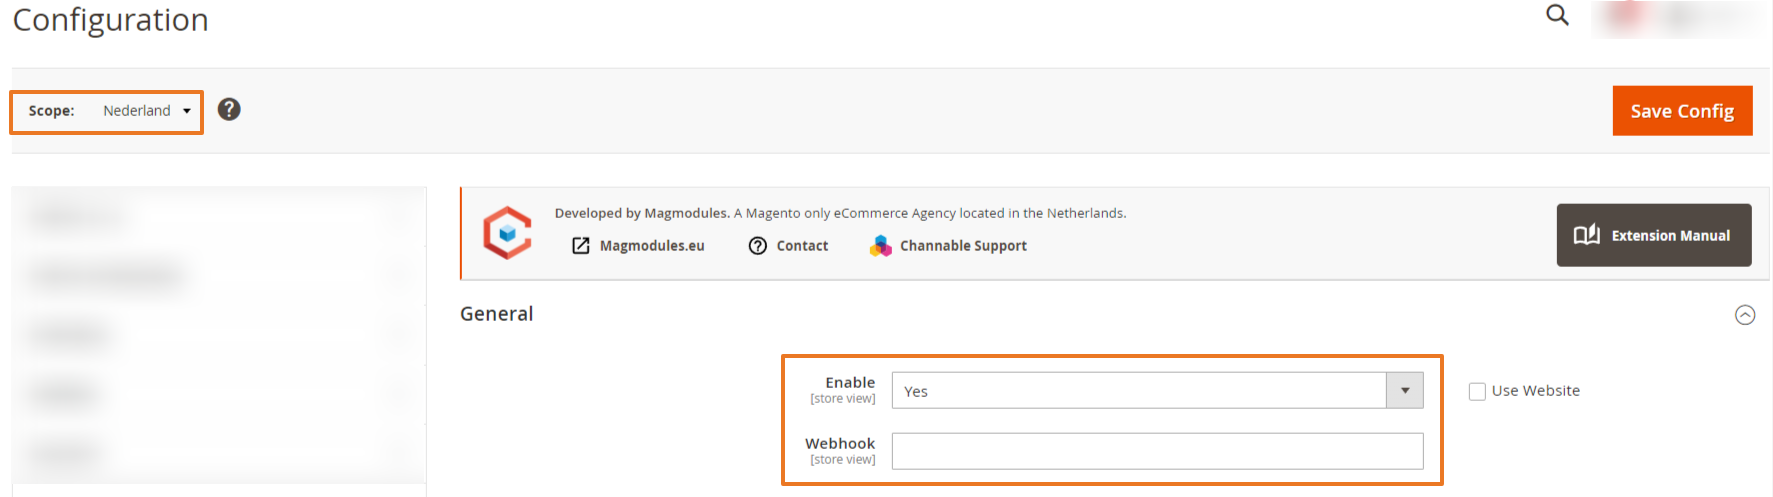 Configuration-Settings-Stores-Magento-Admin